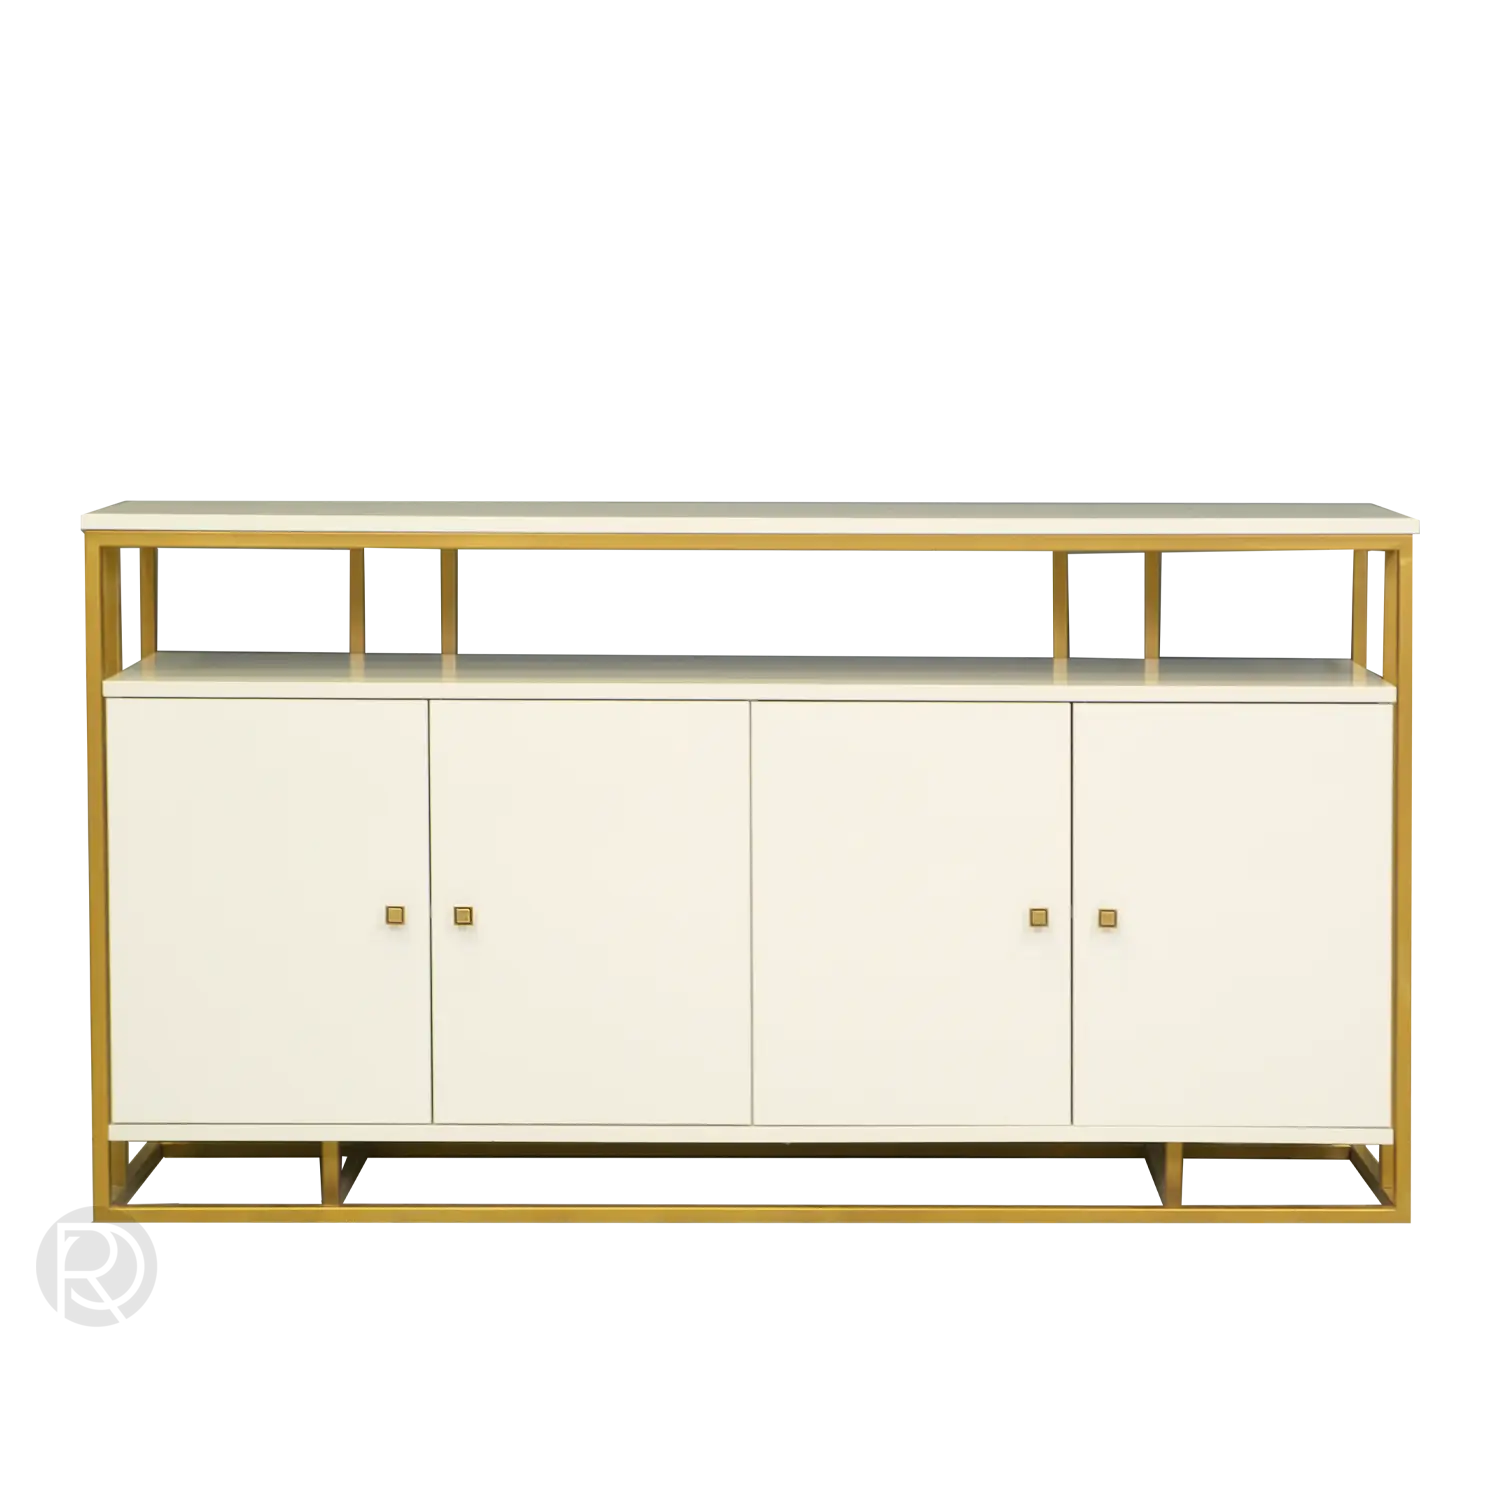 GIFFORD by Romatti Chest of Drawers